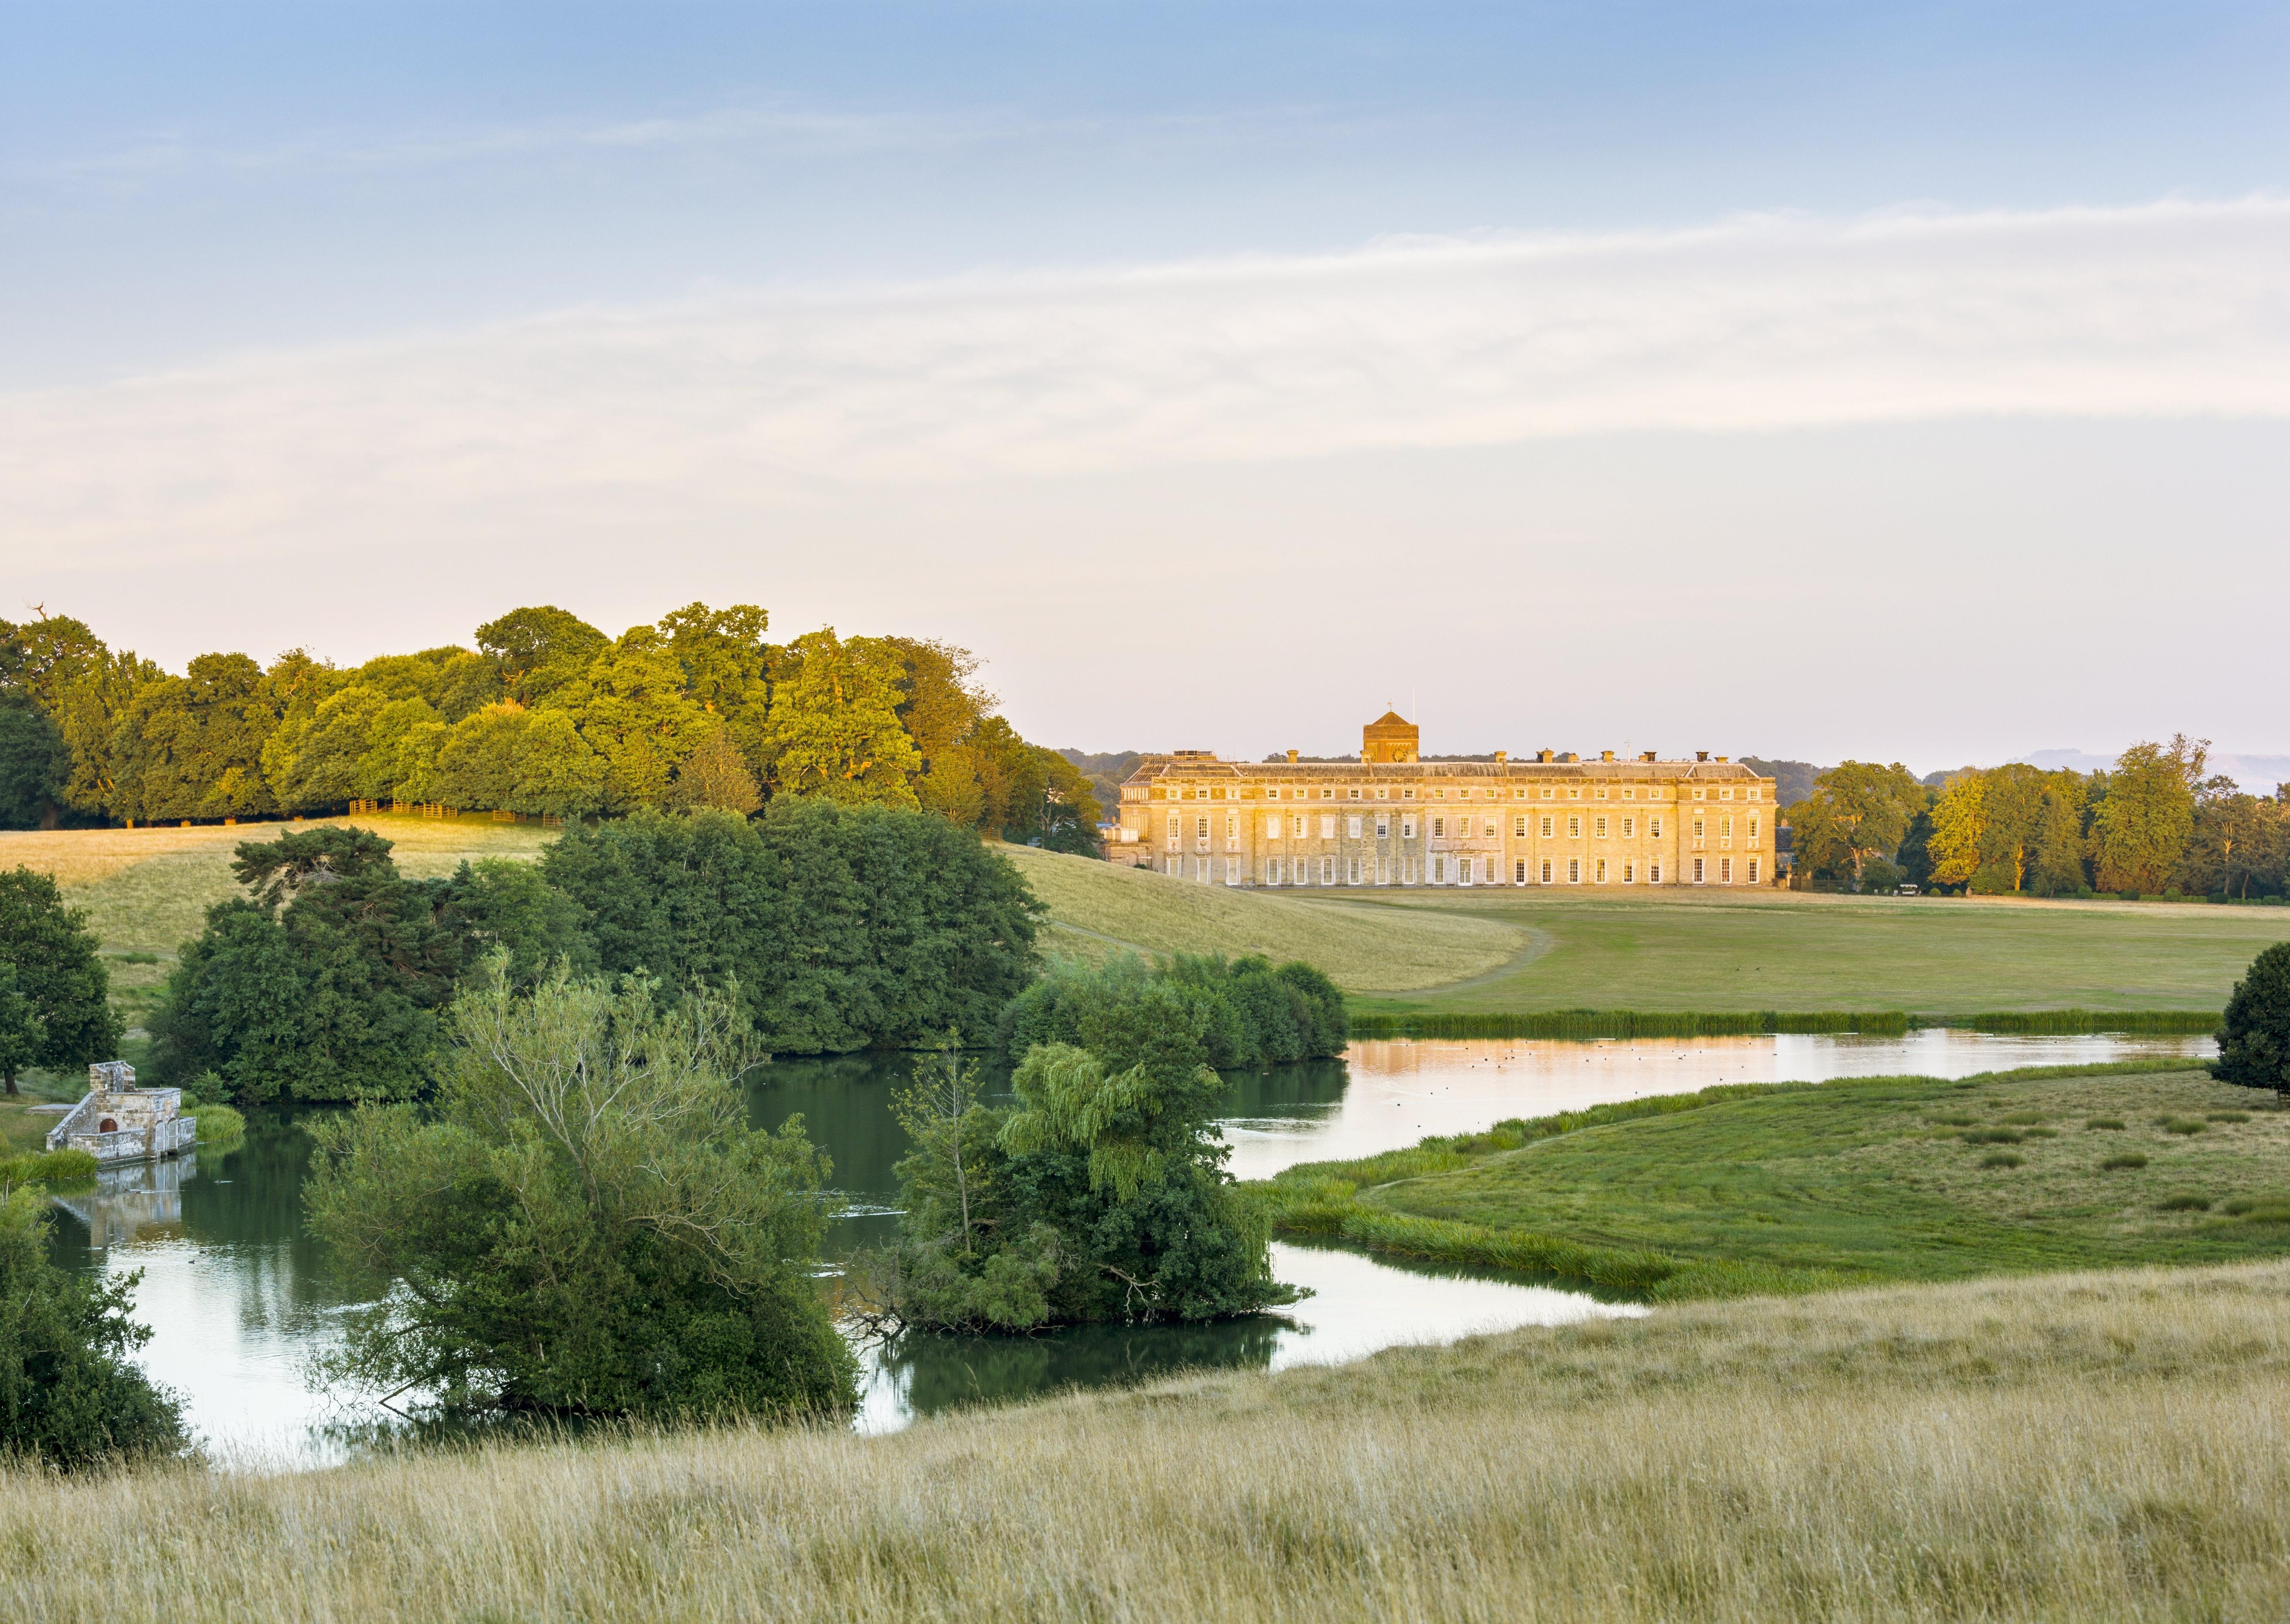 The Petworth Park Antiques and Fine Art Fair takes place from May 15-17